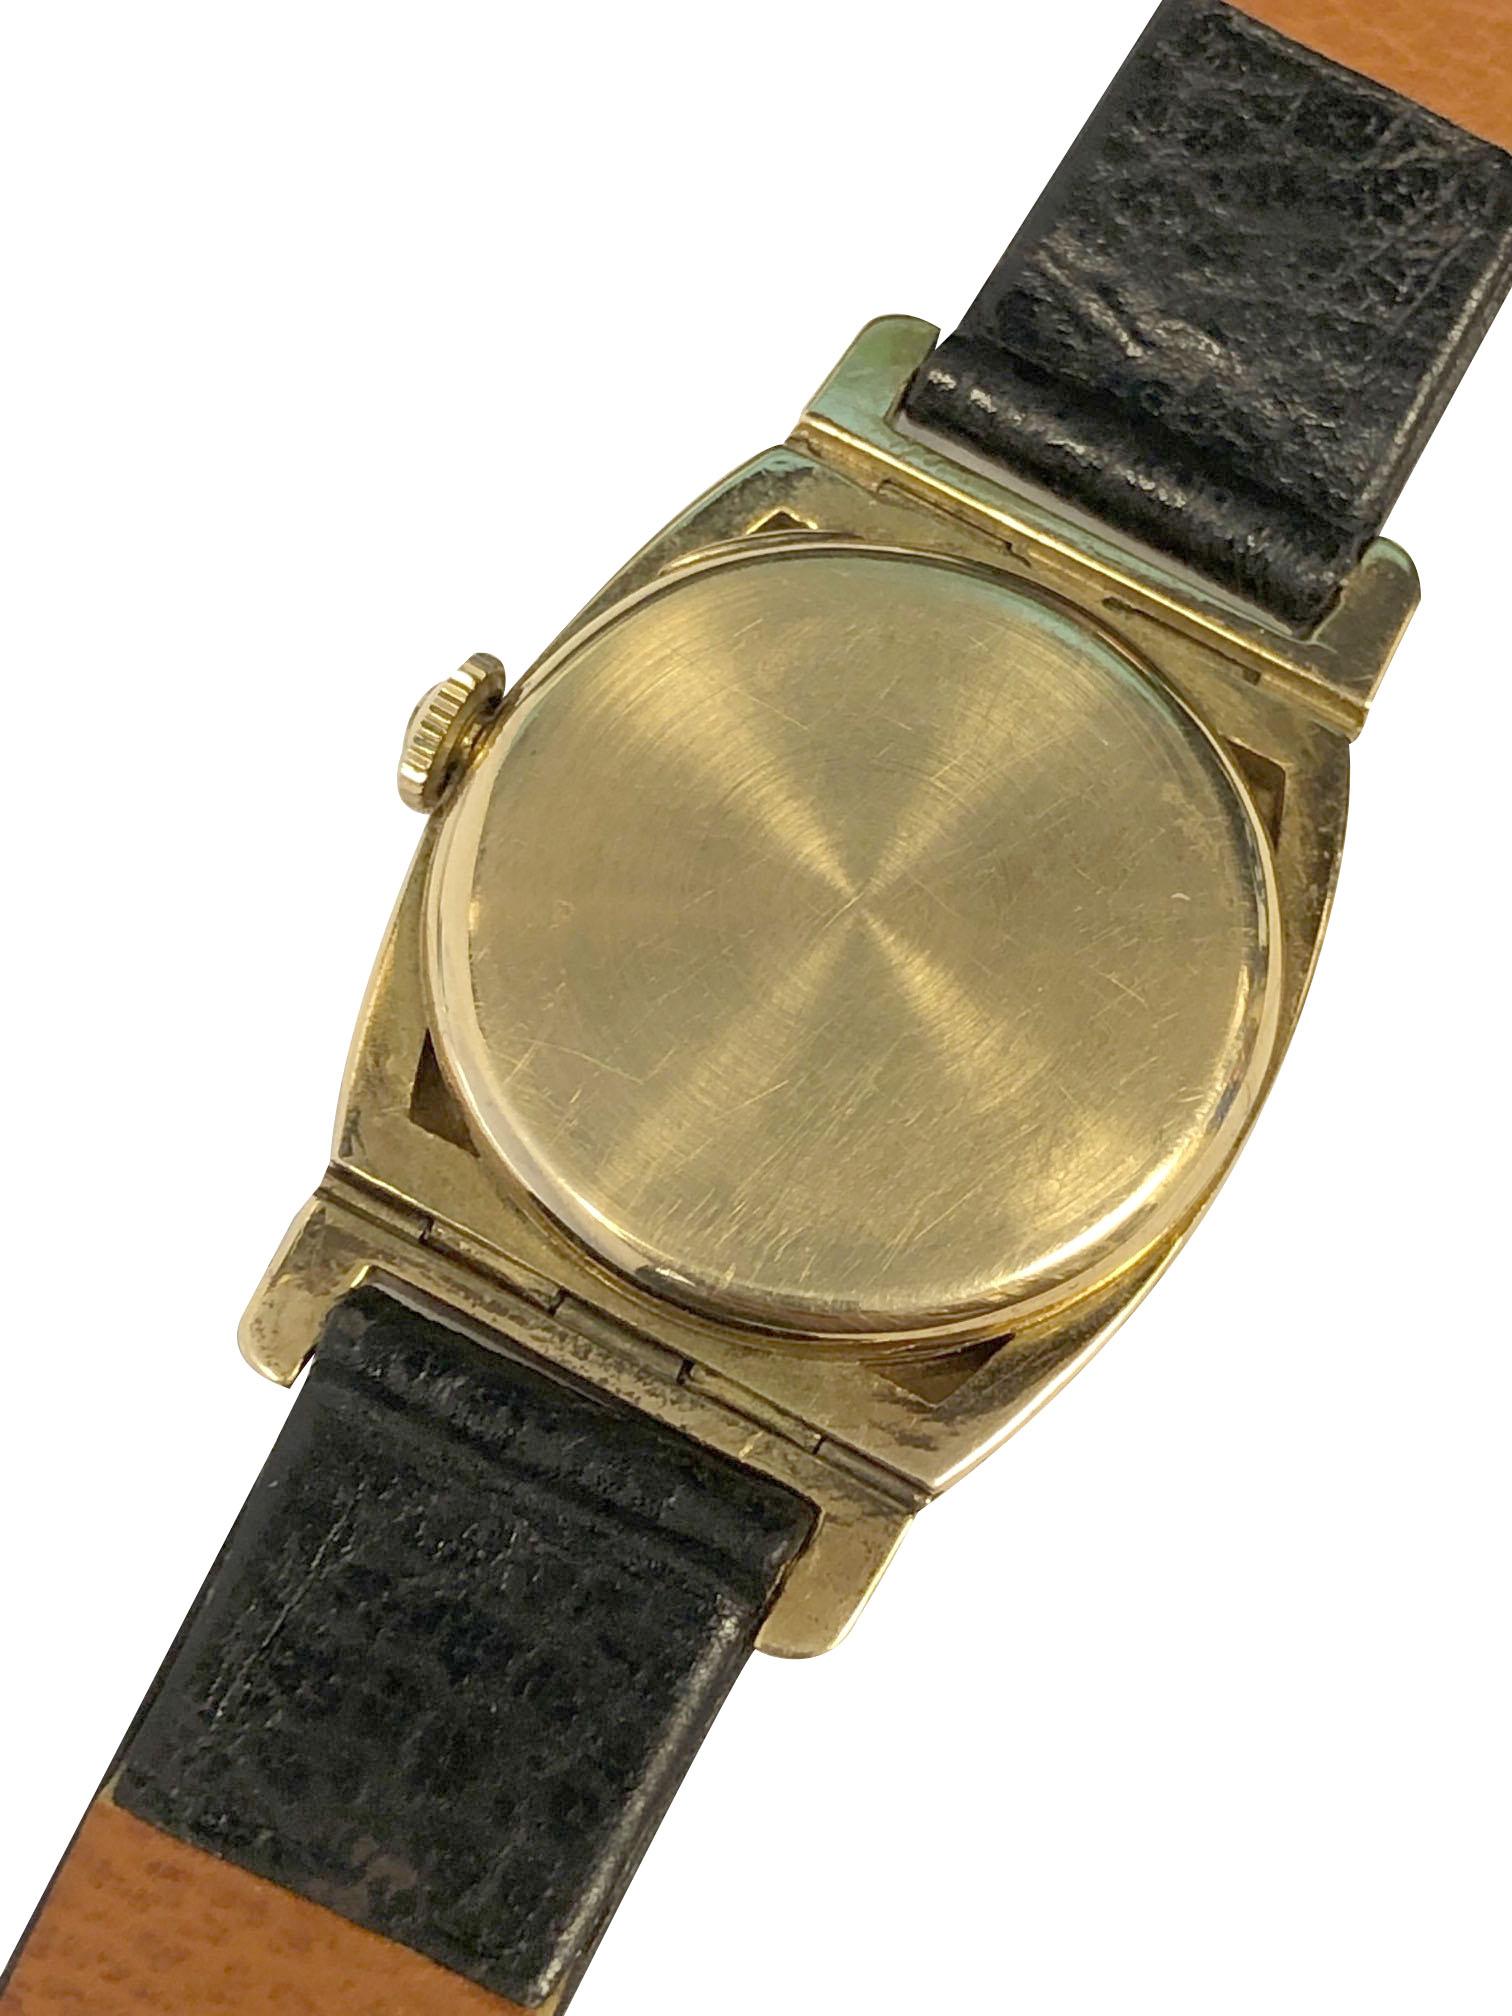 Circa 1930s Hamilton Coronado Wrist Watch, measuring 1 5/8 inches from Lug end to end and 1 1/8 inch wide. 3 Piece 14K Yellow Gold case with Enamel bezel and  flexible lugs. 17 Jewel mechanical, manual wind movement. New Hirsch Black Leather grain